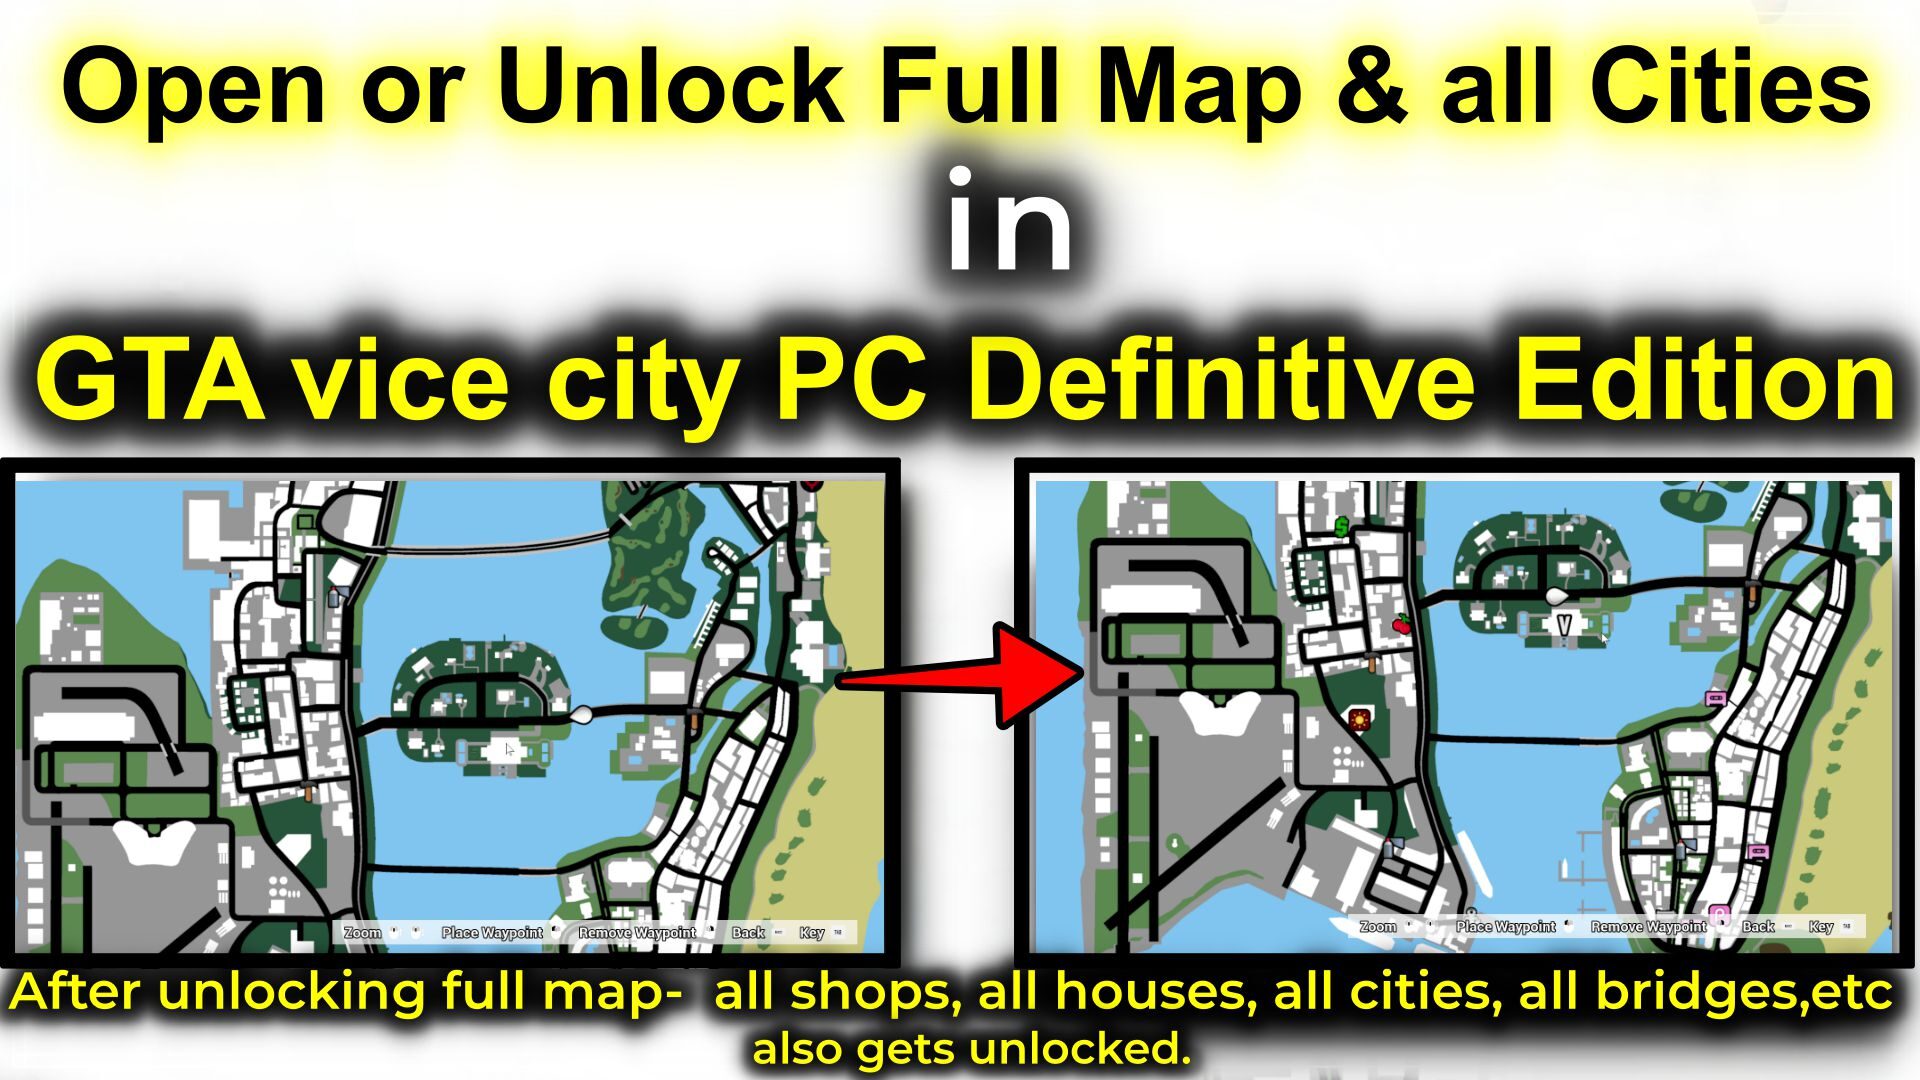 Open or Unlock Full Map & all Cities in GTA vice city PC Definitive Edition